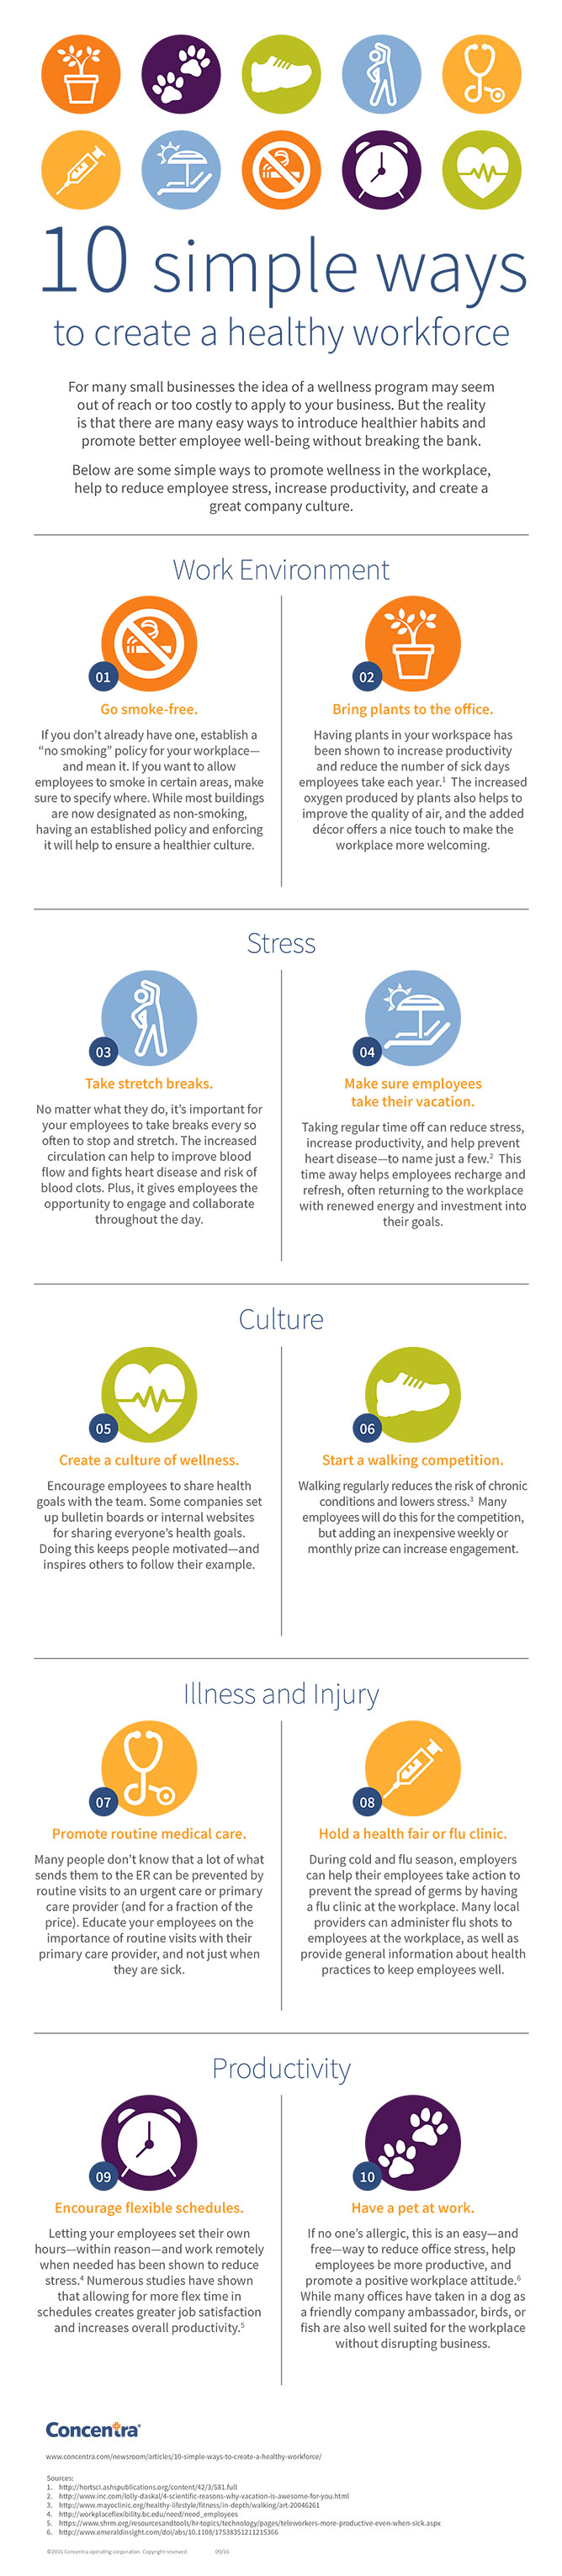 Concentra-Top-10-Simple-Ways-to-Create-a-Healthy-Workforce-Infographic